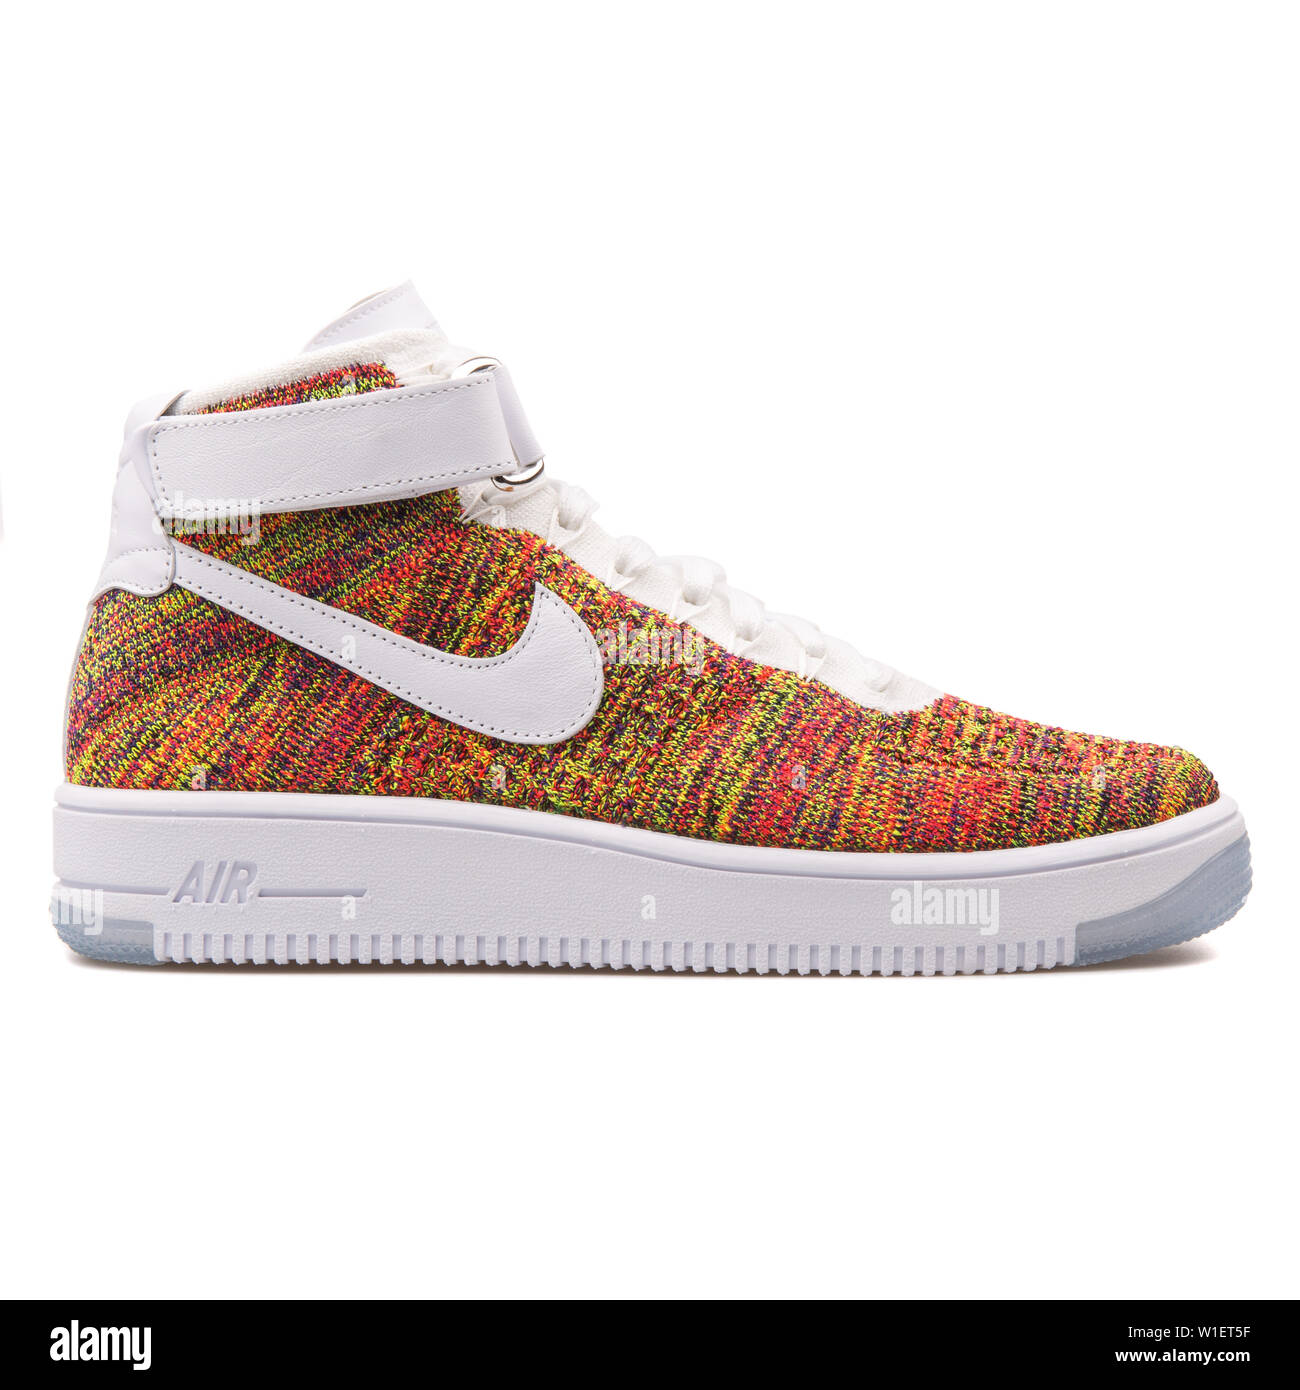 VIENNA, AUSTRIA - AUGUST 10, 2017: Nike Air Force 1 Ultra Flyknit Mid volt  multi color sneaker on white background Stock Photo - Alamy